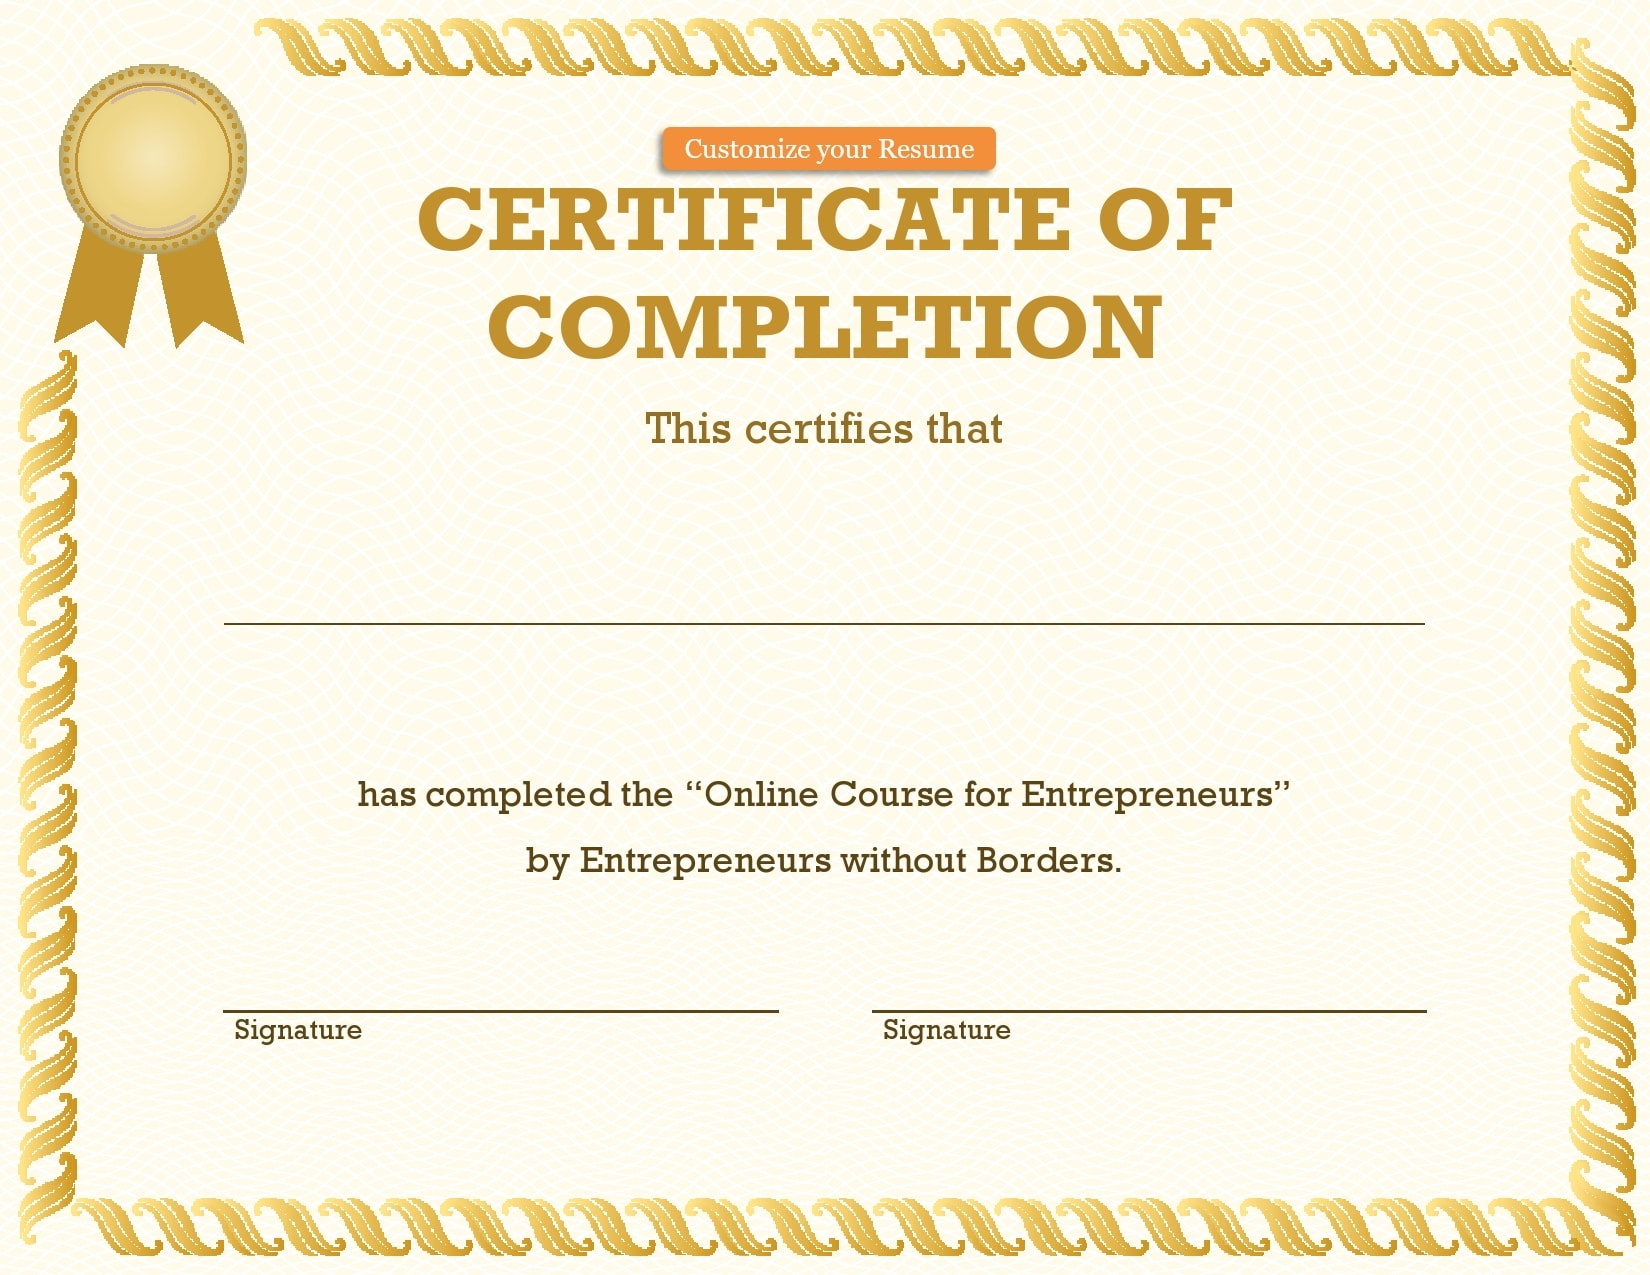 10 Great Certificate of Completion Templates (10% FREE) With Regard To Certificate Of Completion Word Template